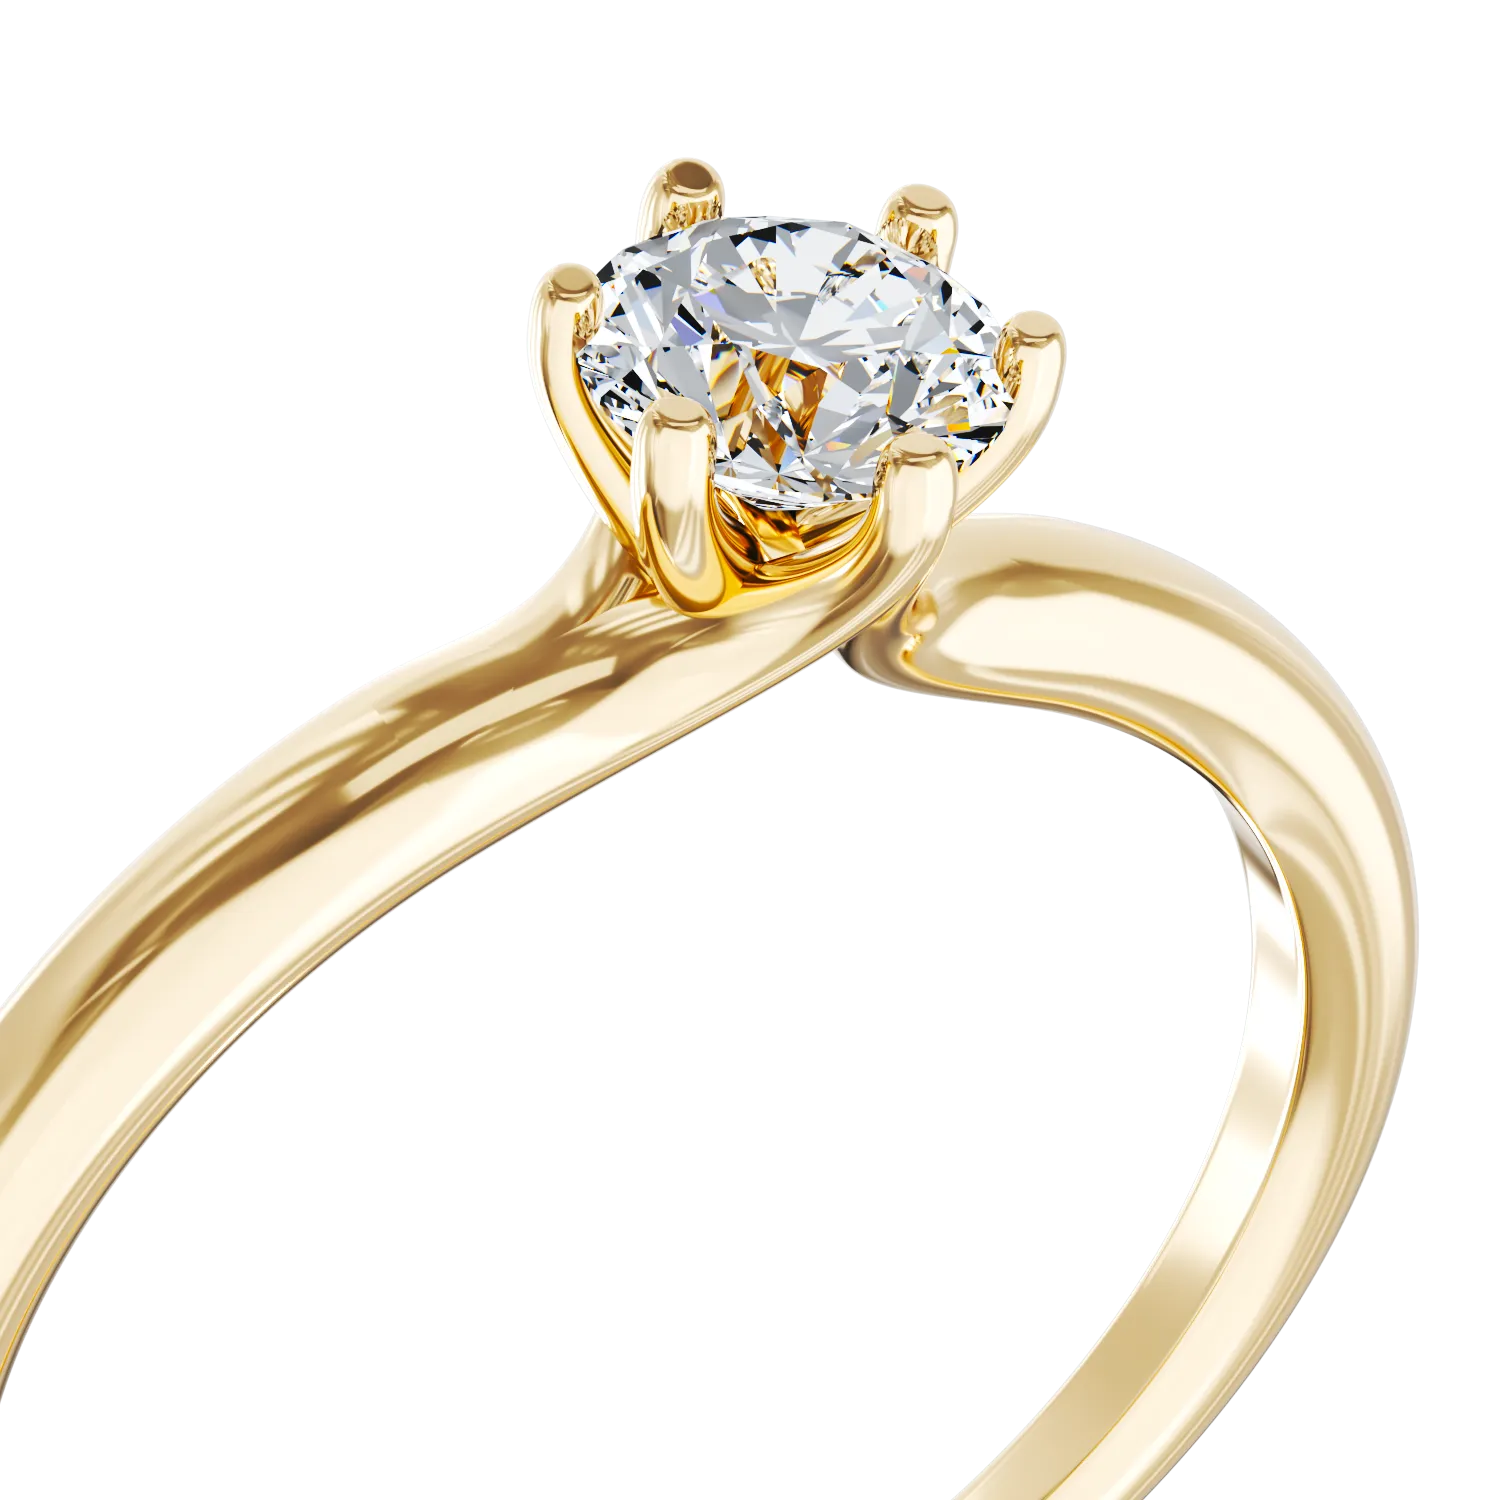 18k yellow gold engagement ring with 0.31ct diamond